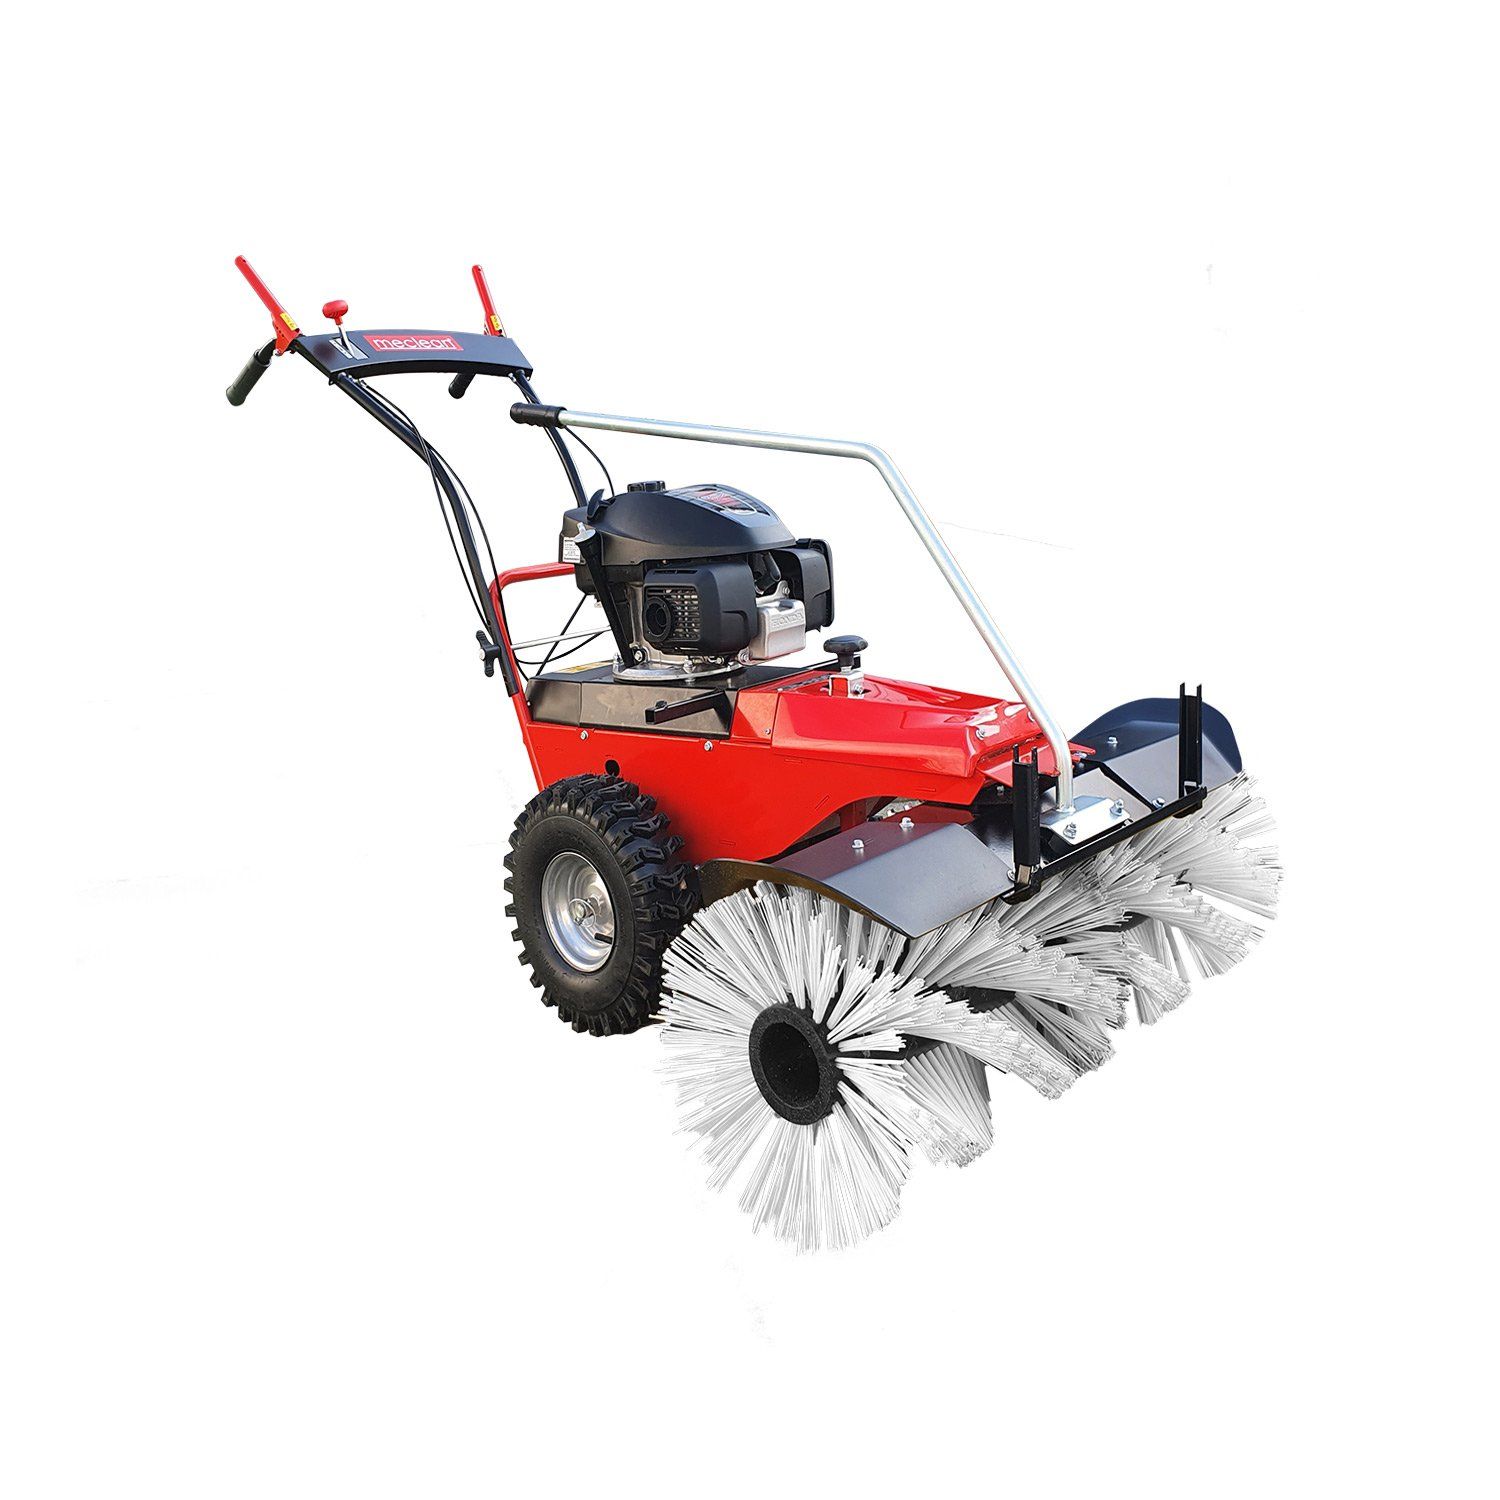 Meclean professional outdoor sweeper petrol powered drive FRONTSWEEP PRO 82